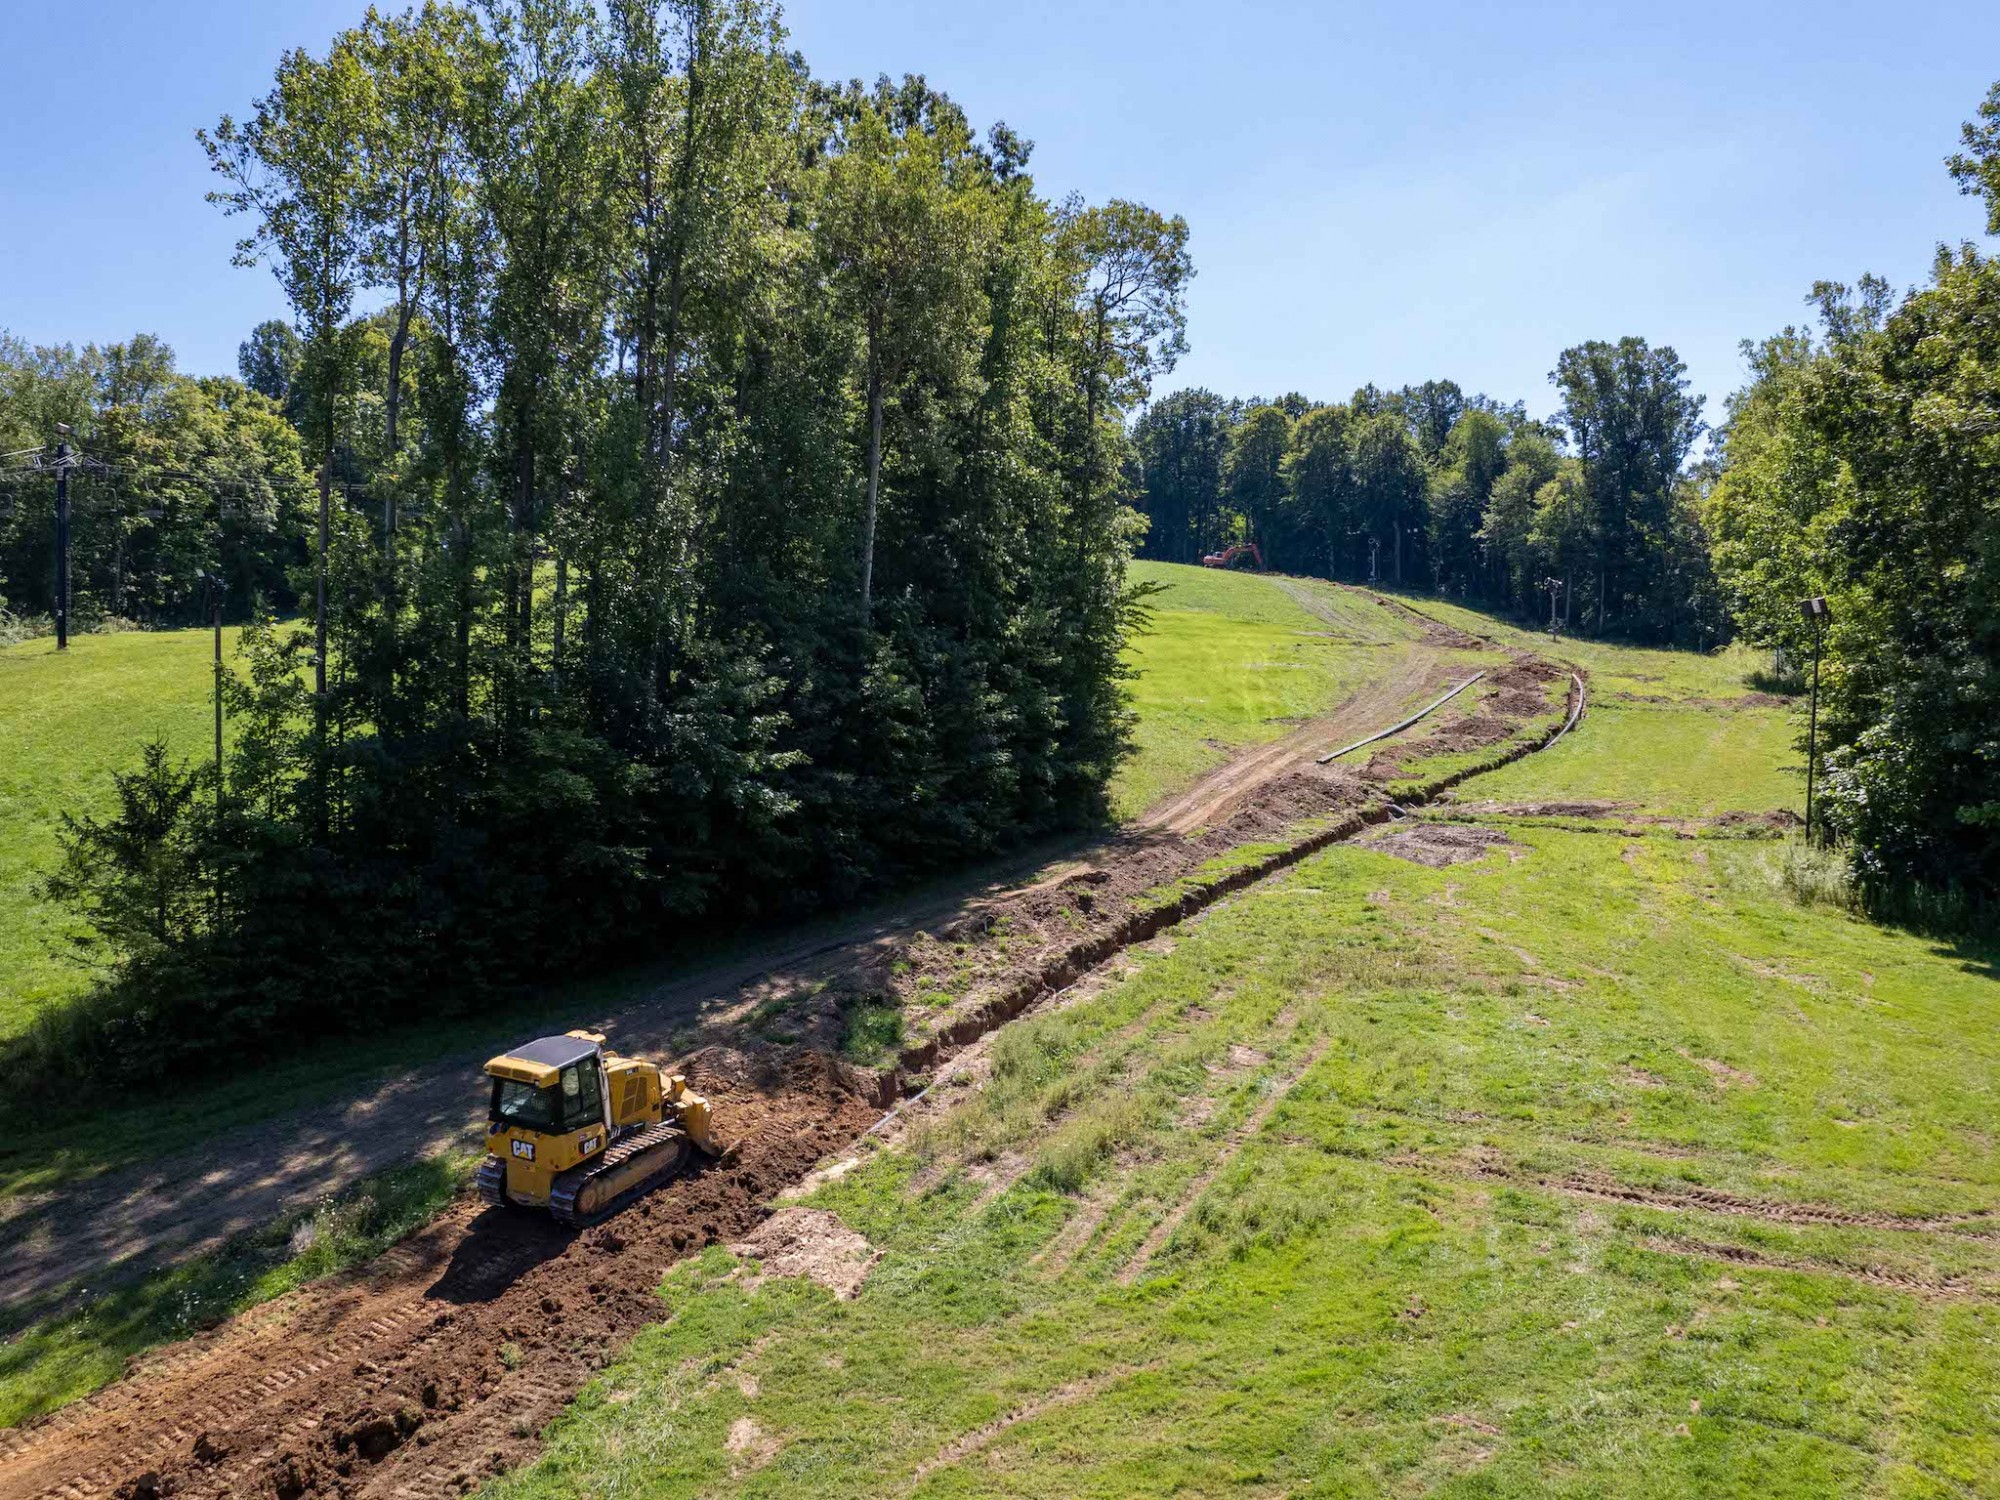 Burying Steel Pipeline for Snowmaking Improvements on West Woods Trail at Snow Trails Ohio